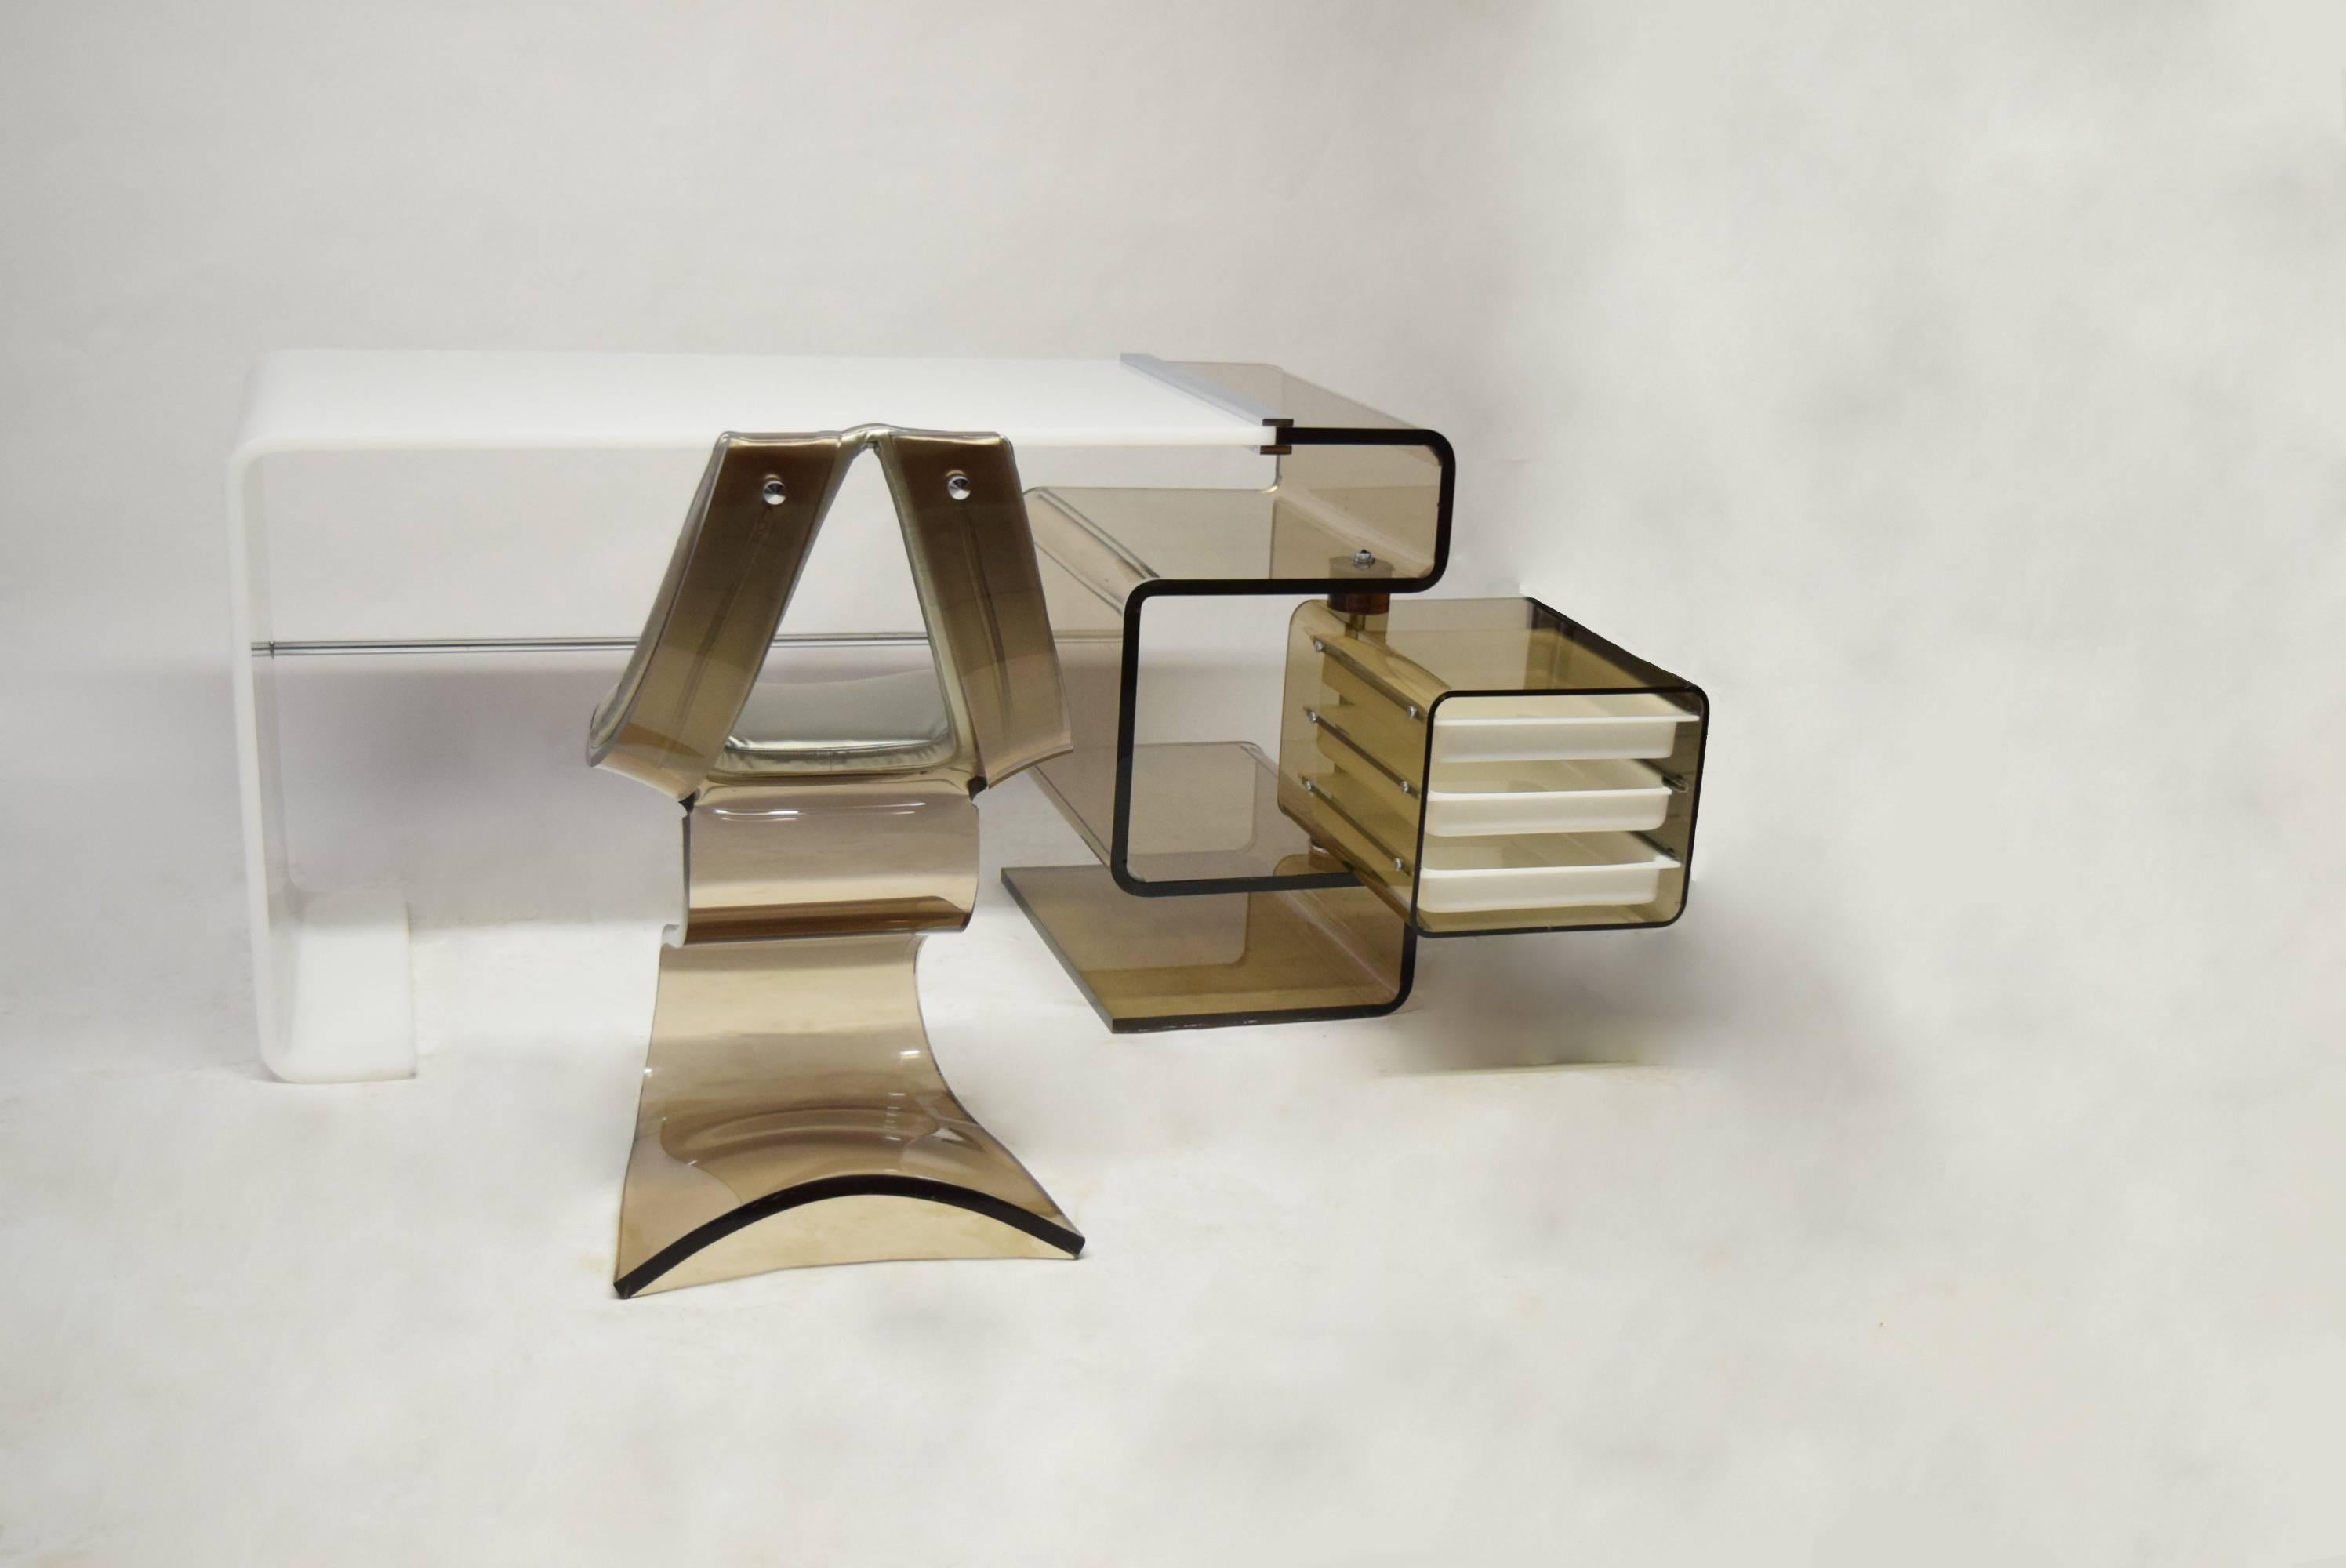 Desk with matching chair designed by Rena Dumas in 1971. The desk is white and smoked acrylic  with chrome hardware. The storage is smoked with three white drawers that swing out for access. 
The matching chair is also smoked with chrome hardware.